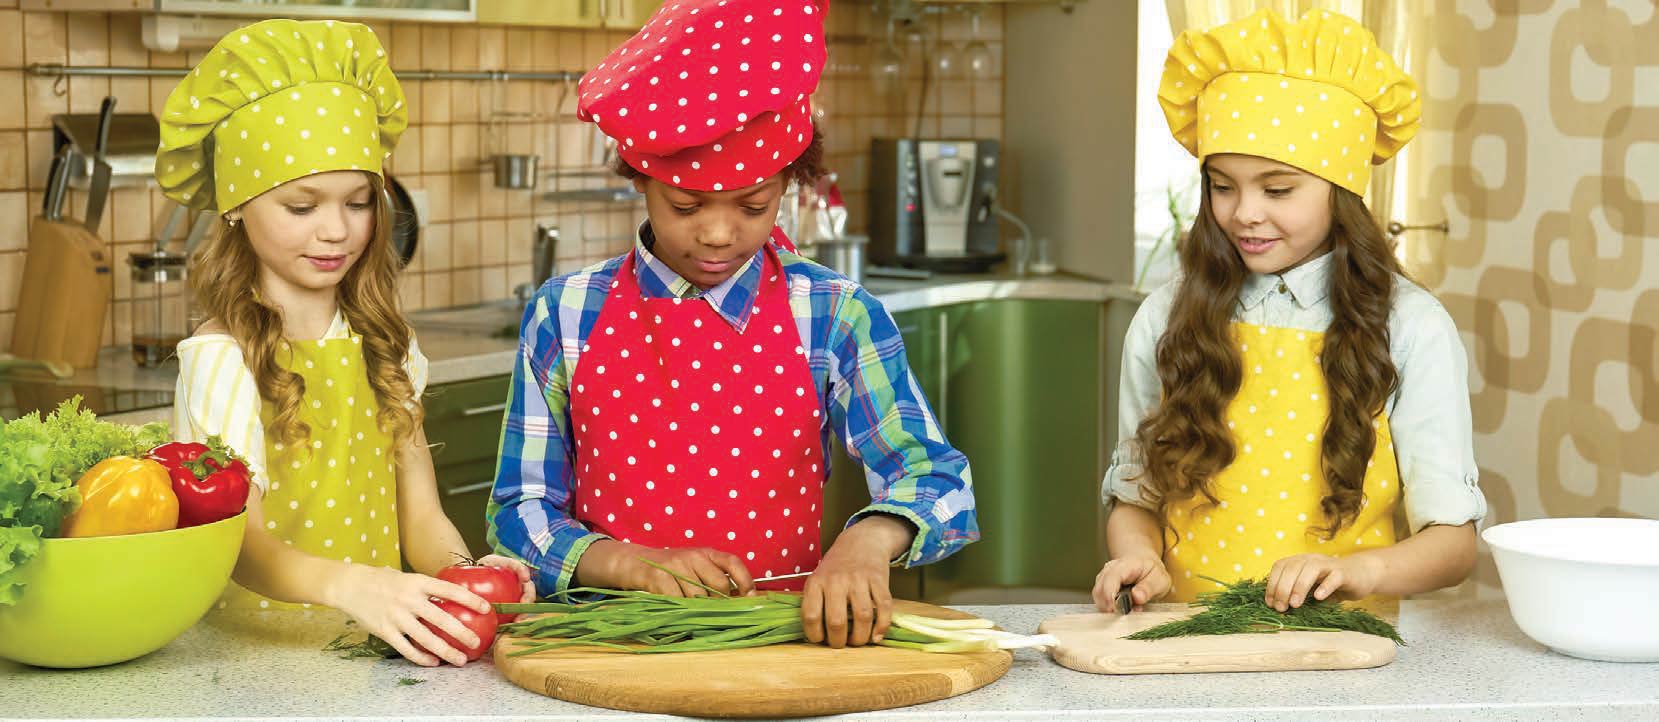 Keeping Kids Safe in the Kitchen